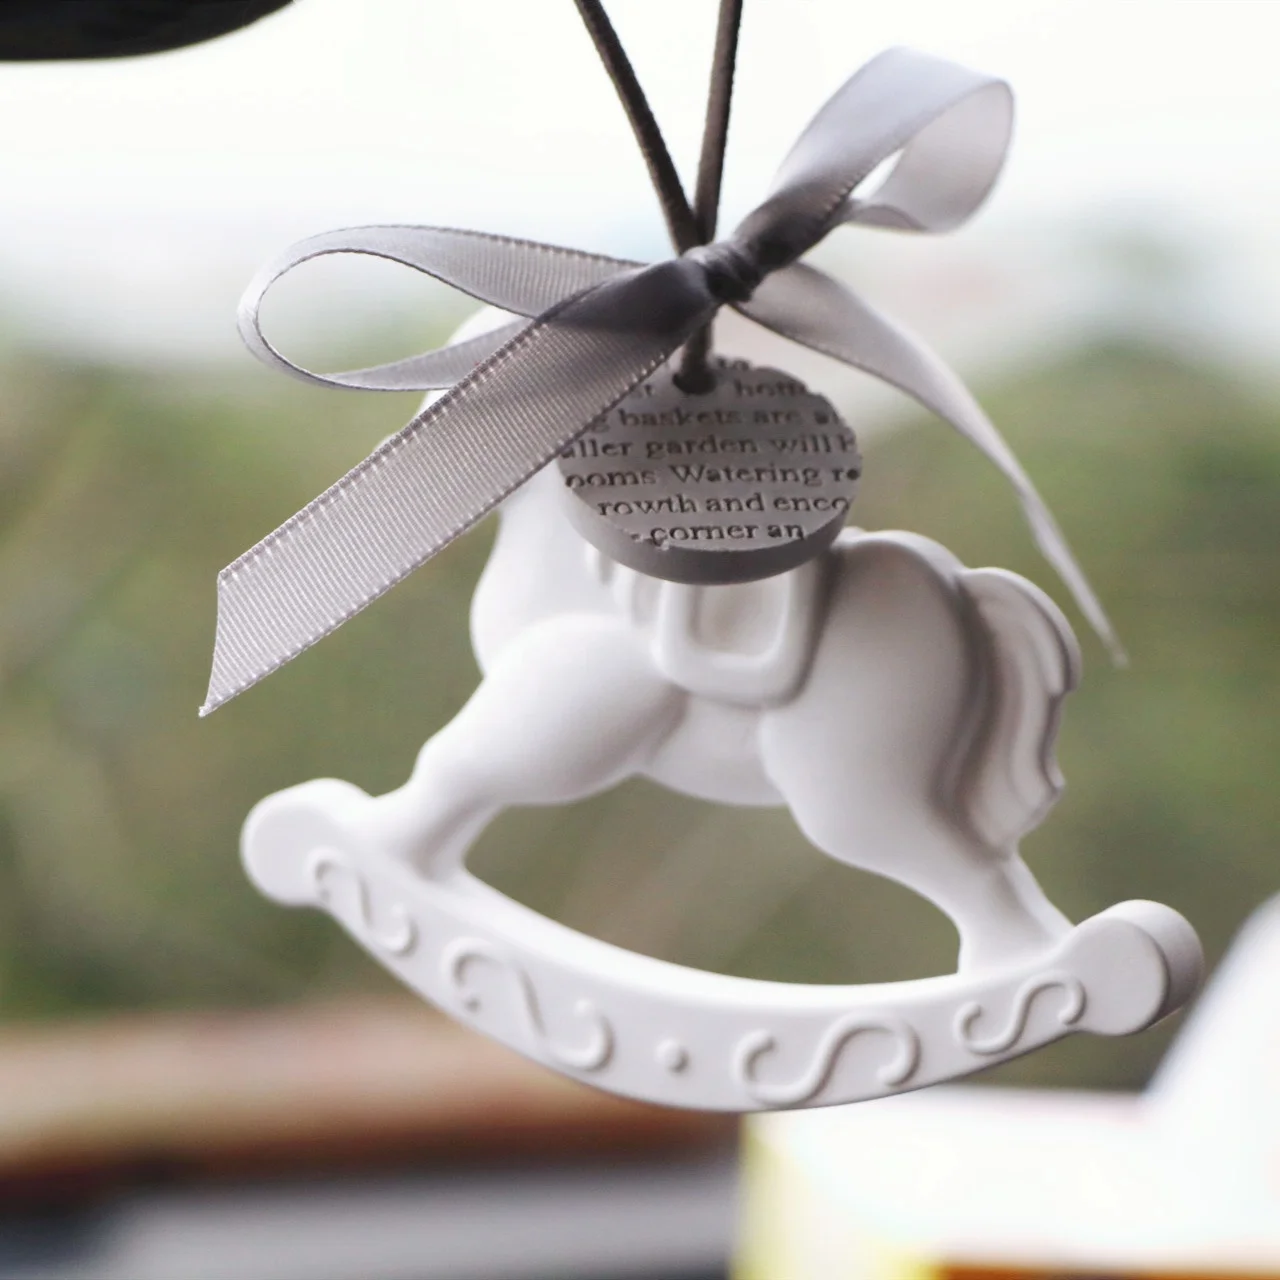 

White Horse Shaped Hanging Car Air Freshener Fragrance Oil Diffuser Scented Aroma Ceramic Stone